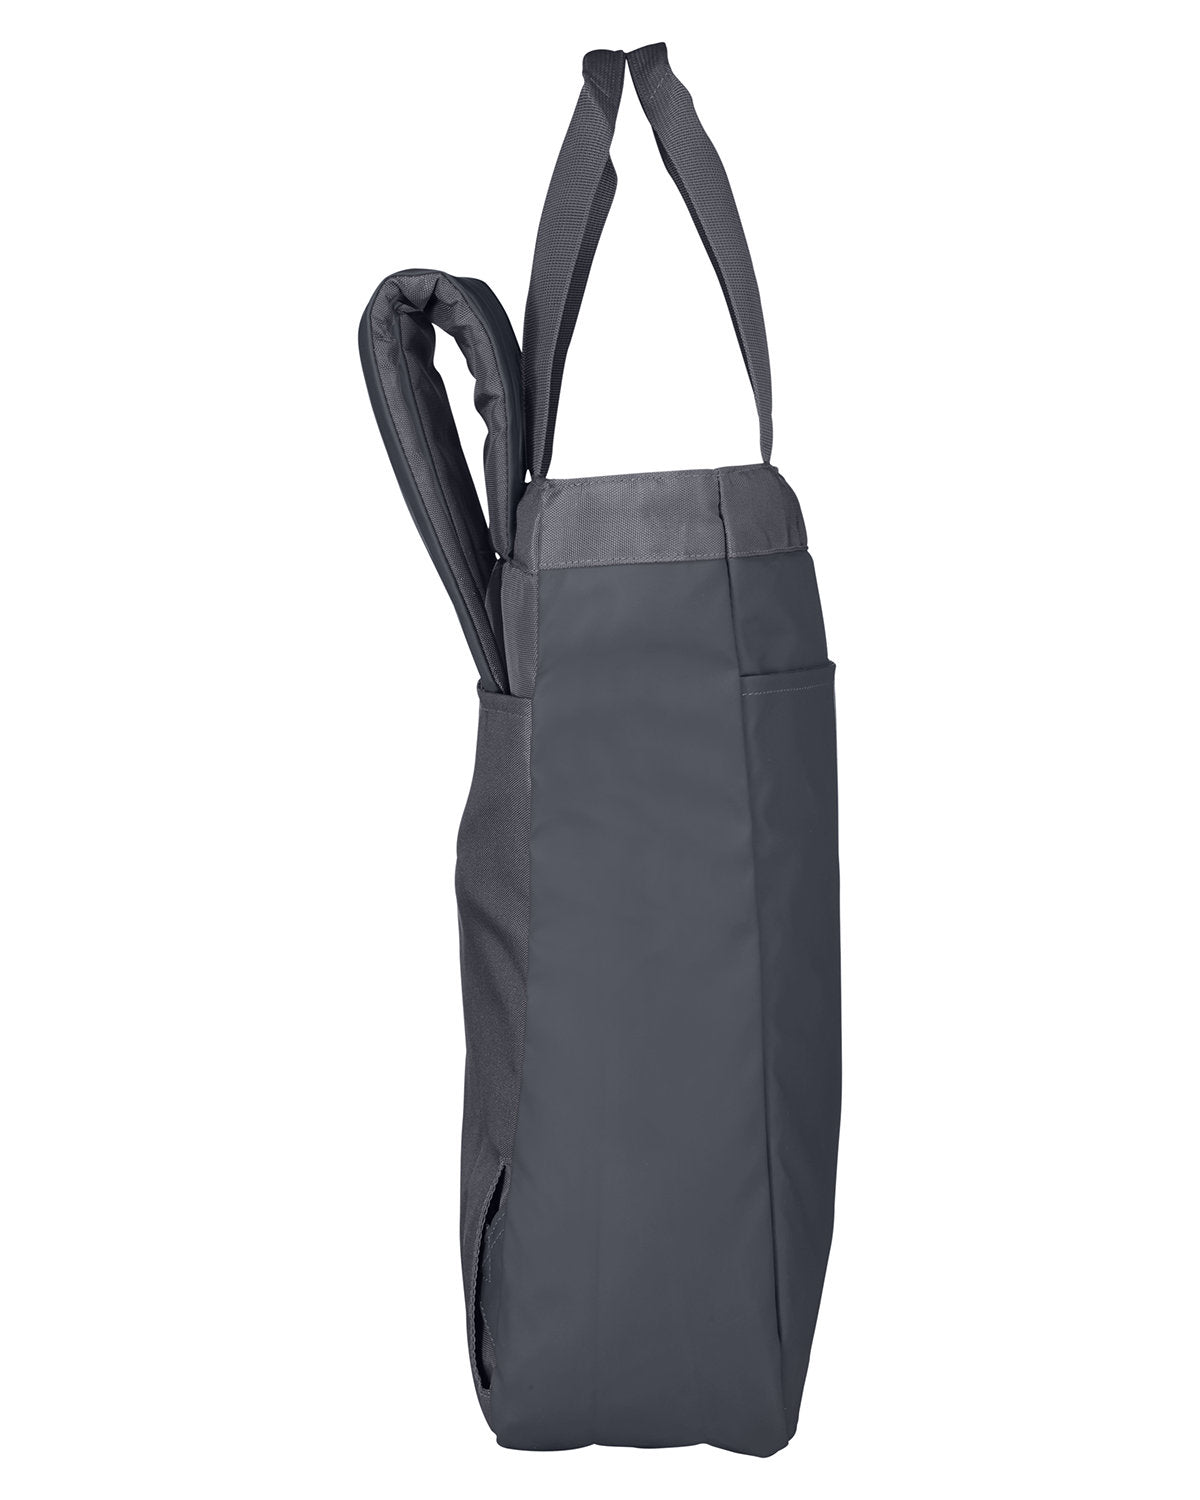 NE901-North End-CARBON-North End-Bags and Accessories-3